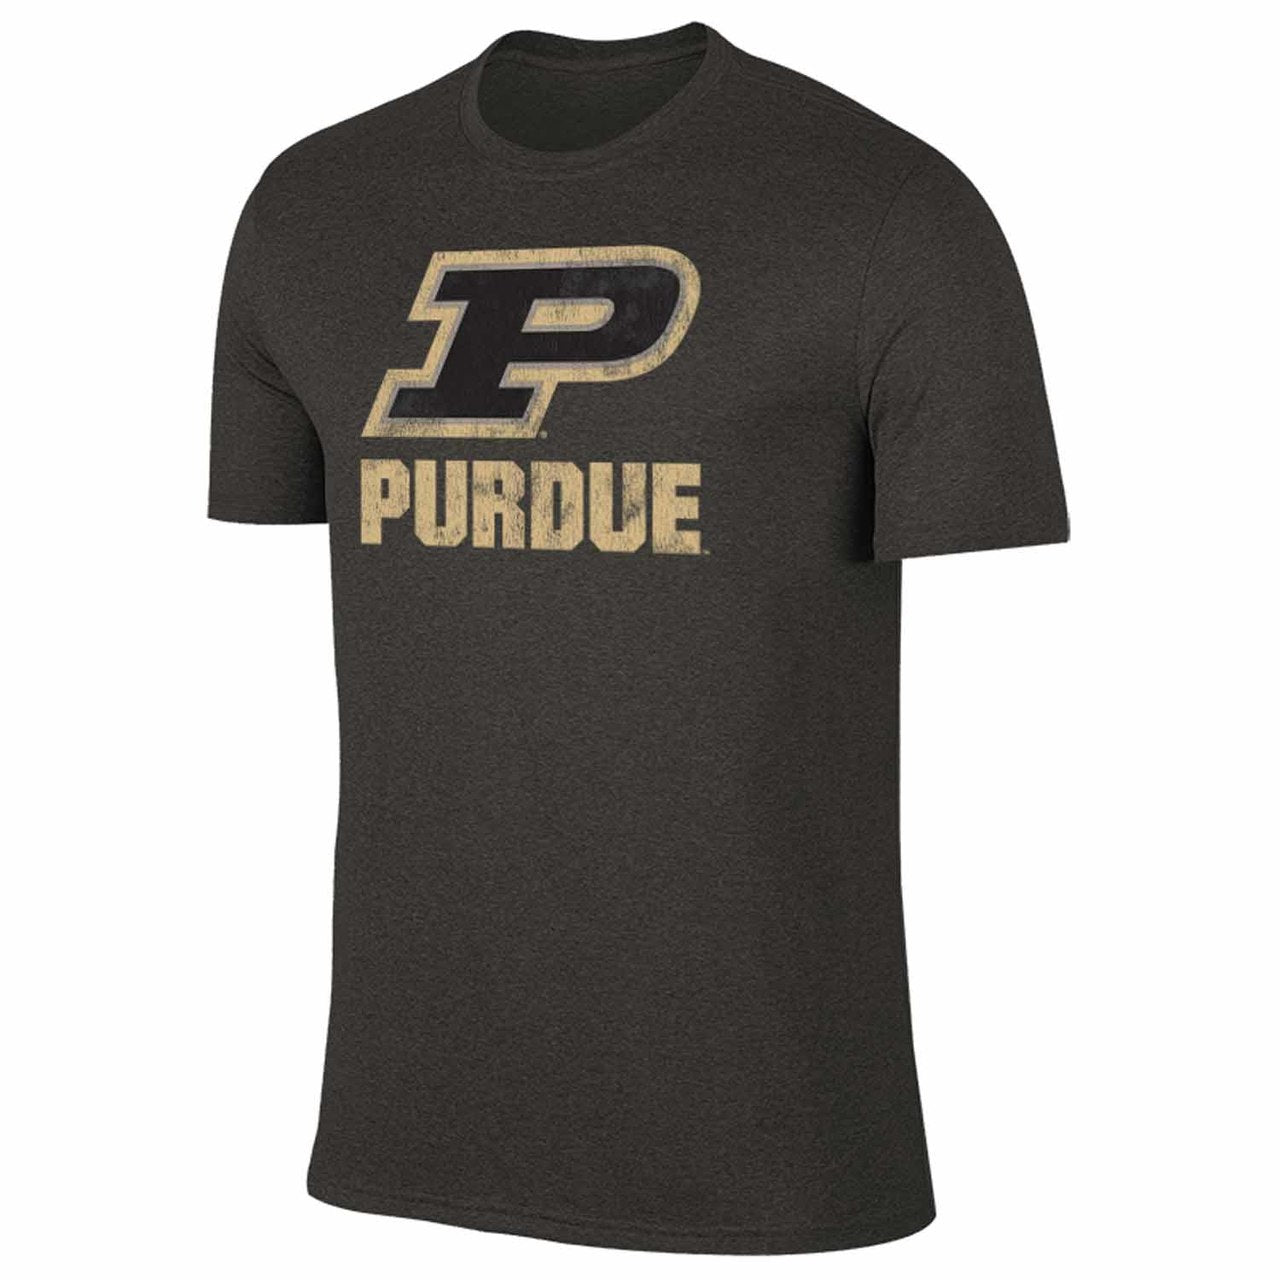 Purdue Boilermakers Adult MVP Heathered Cotton Blend T-Shirt - Black